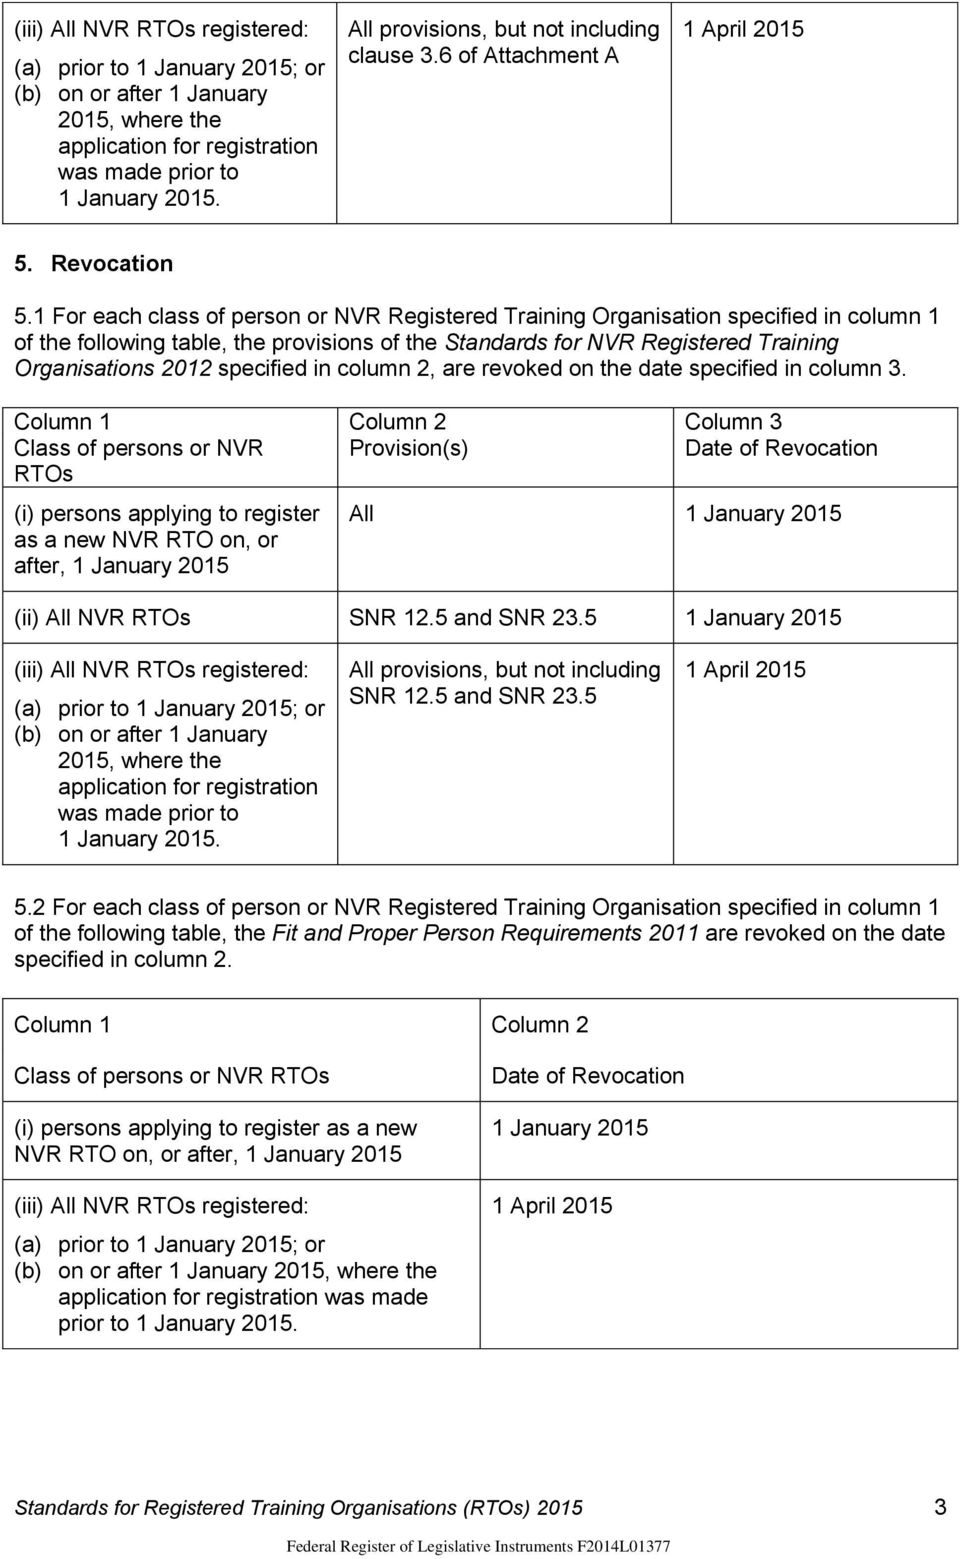 1 For each class of person or NVR Registered Training Organisation specified in column 1 of the following table, the provisions of the Standards for NVR Registered Training Organisations 2012